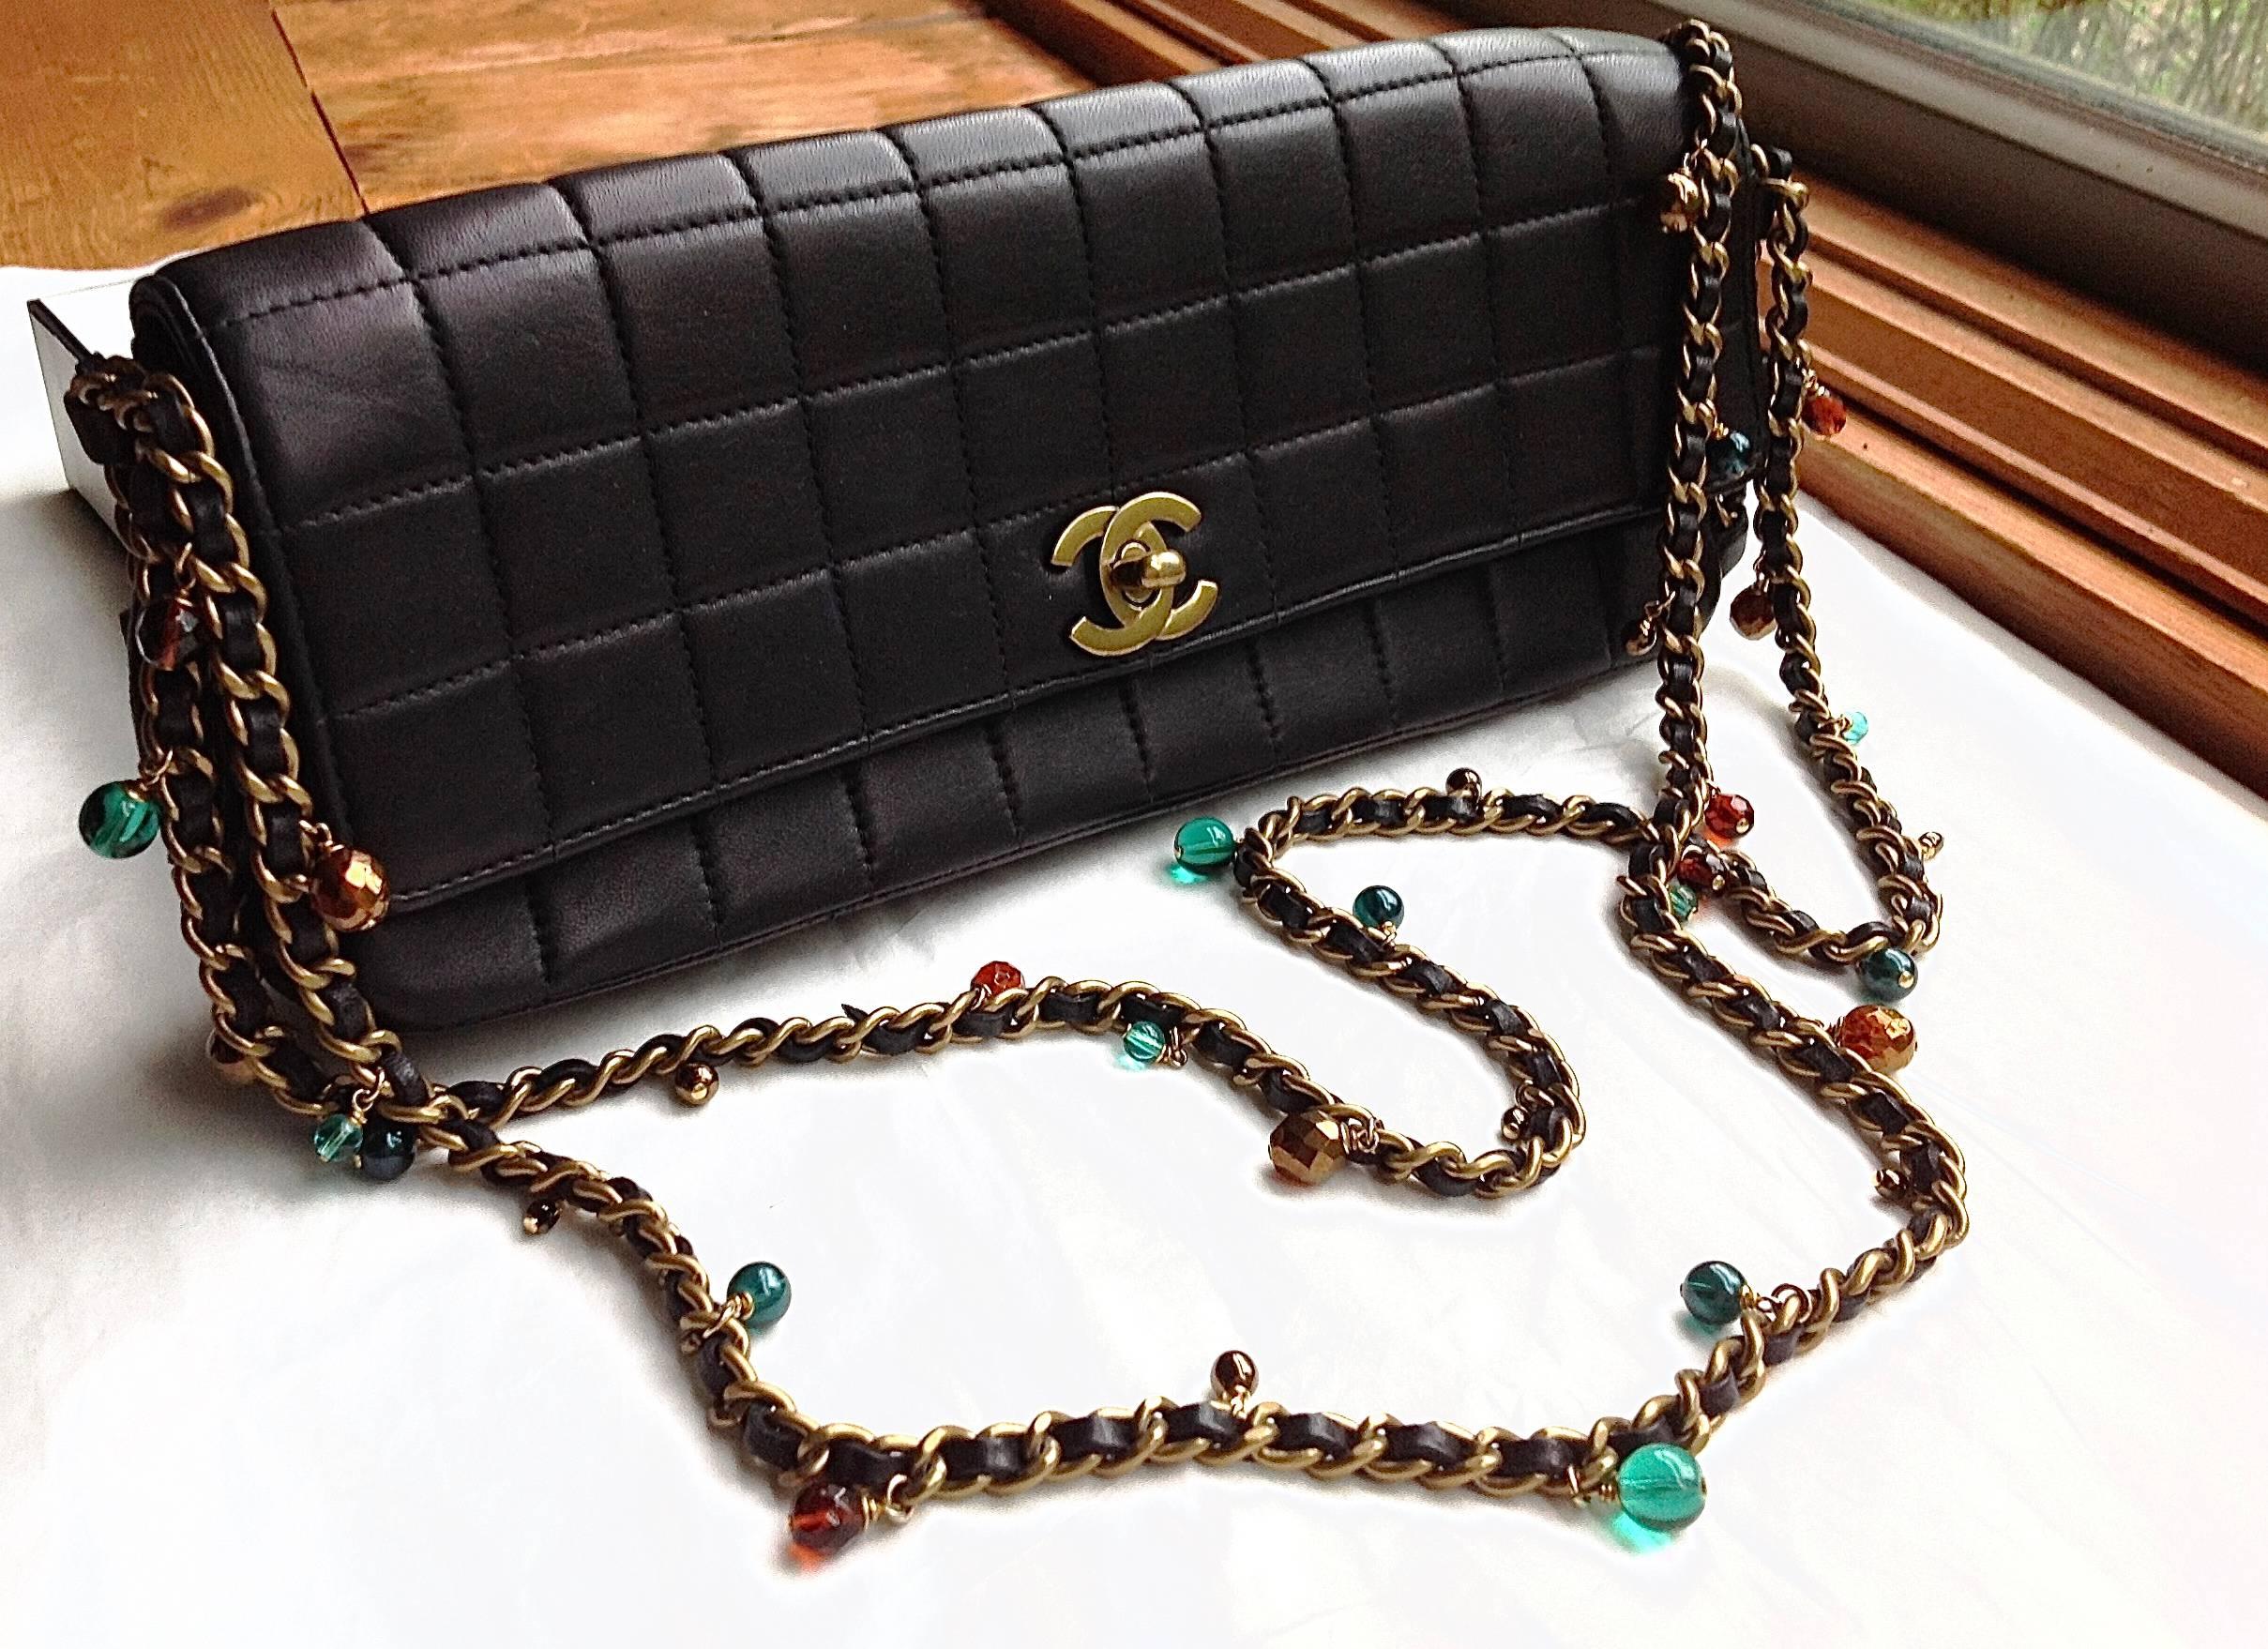 This double long jewelled chain bag is so sumptuously adorned with Gripoix glass beads, faux pearls, and intertwined with lambskin strips. The material of the bag is fully done inside out by black lambskin. This Gorgeous 2003 vintage piece is clean